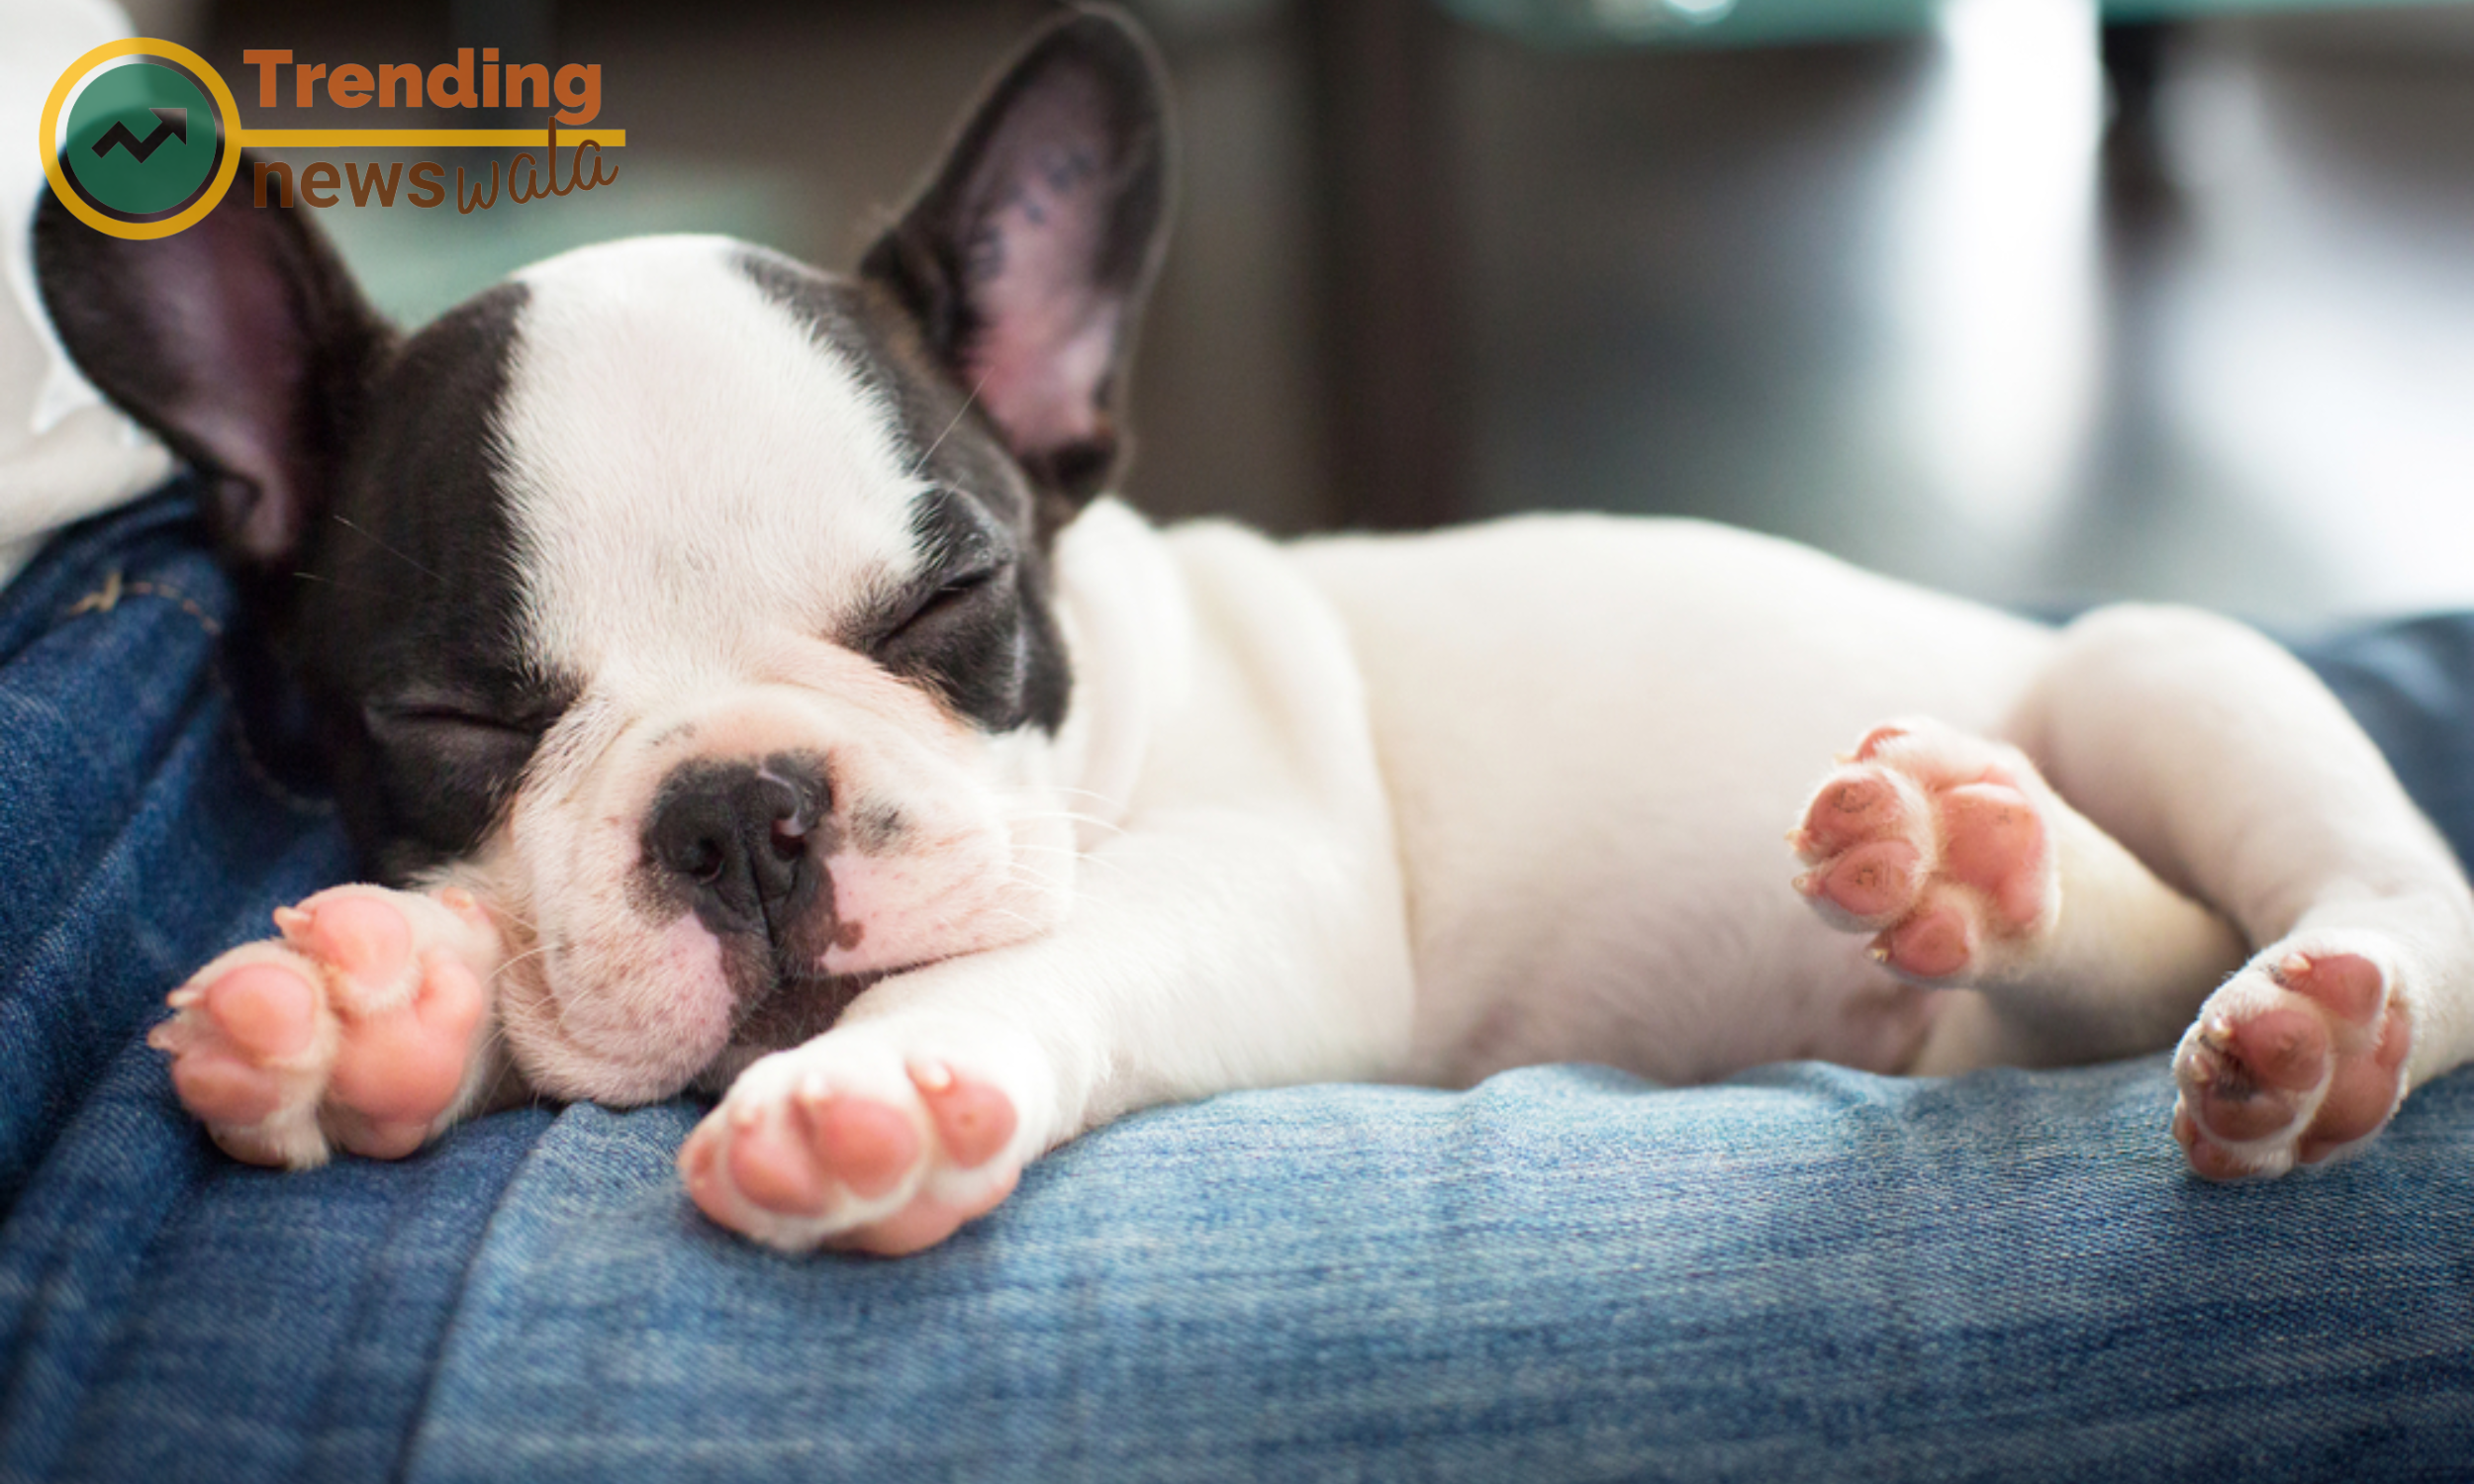 The temperament and personality of the French Bulldog